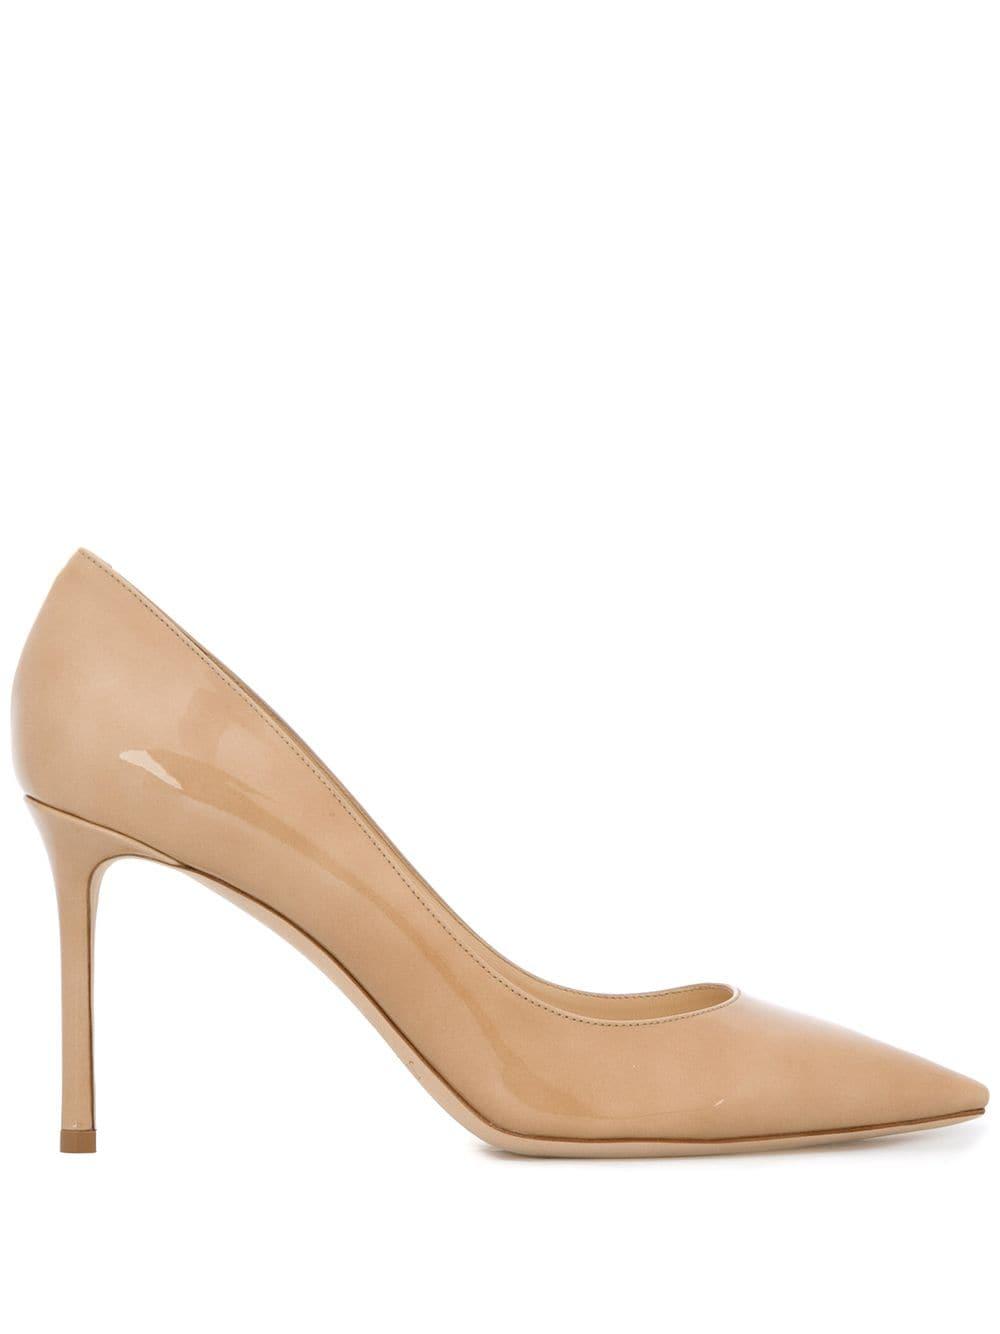 LAutre Chose Nude Patent Leather Pumps in Natural - Lyst